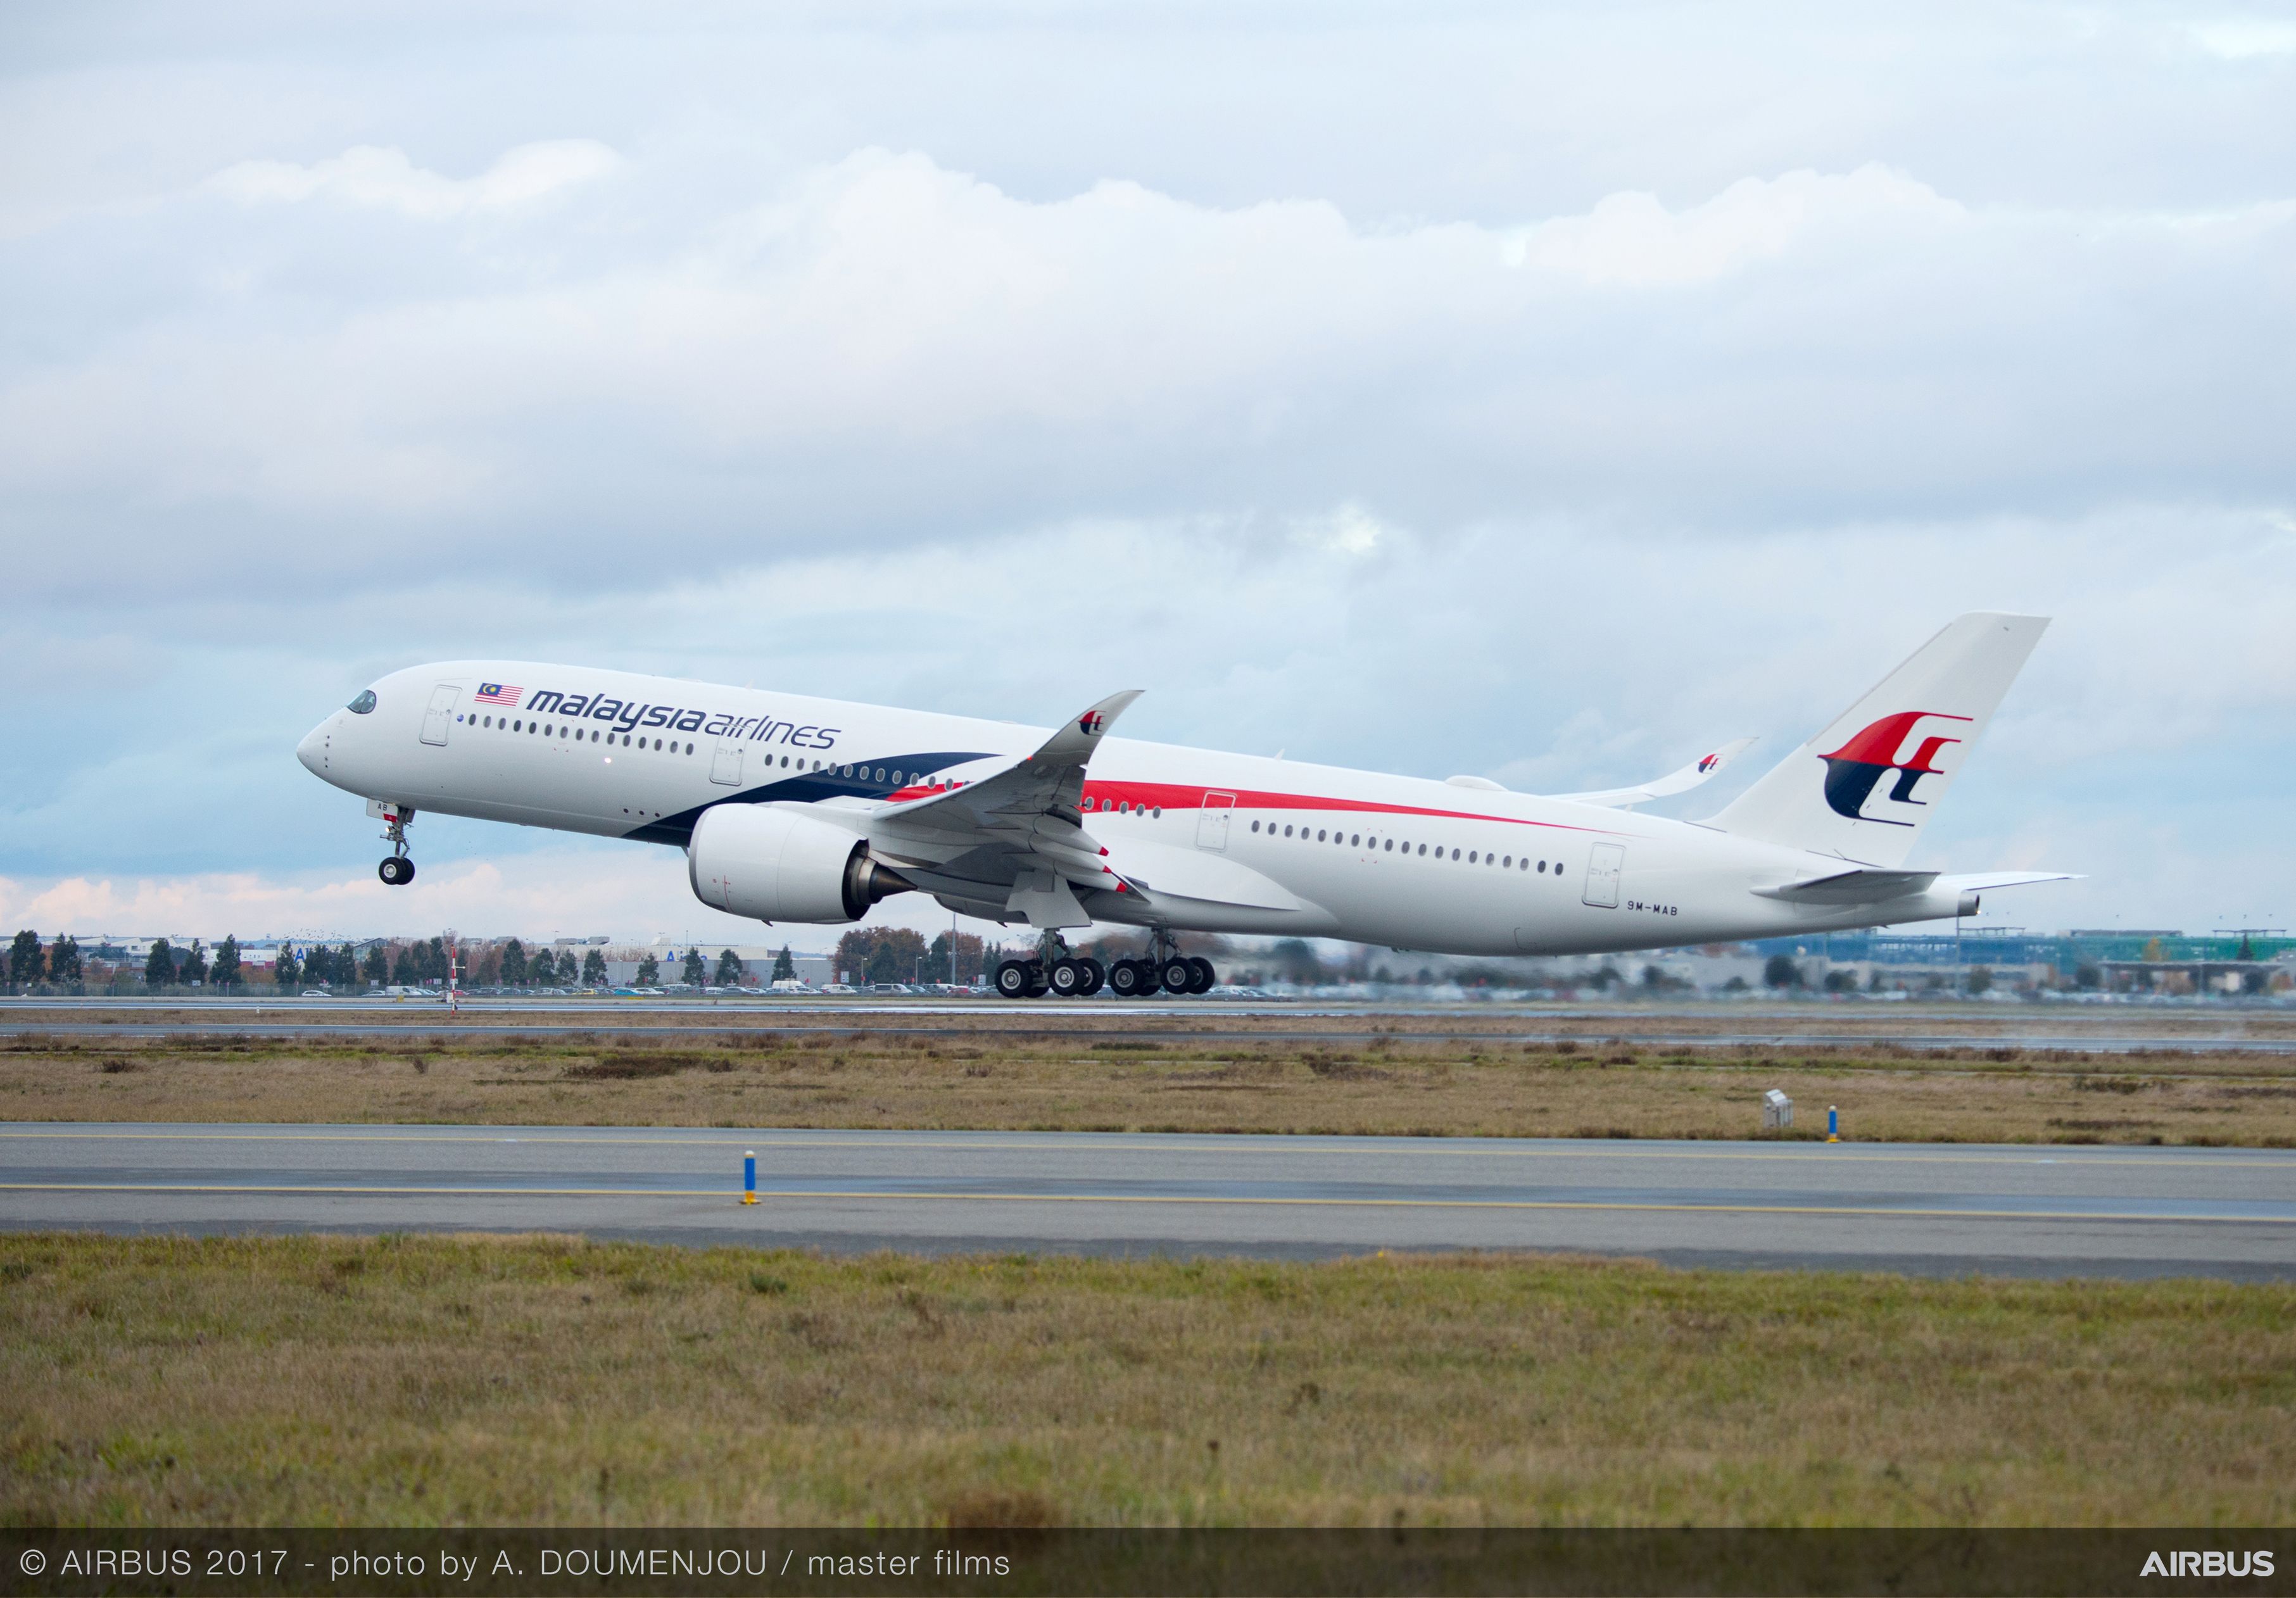 Malaysia Airlines Implements Full Suite of Sabre Network Planning and Optimization Technology